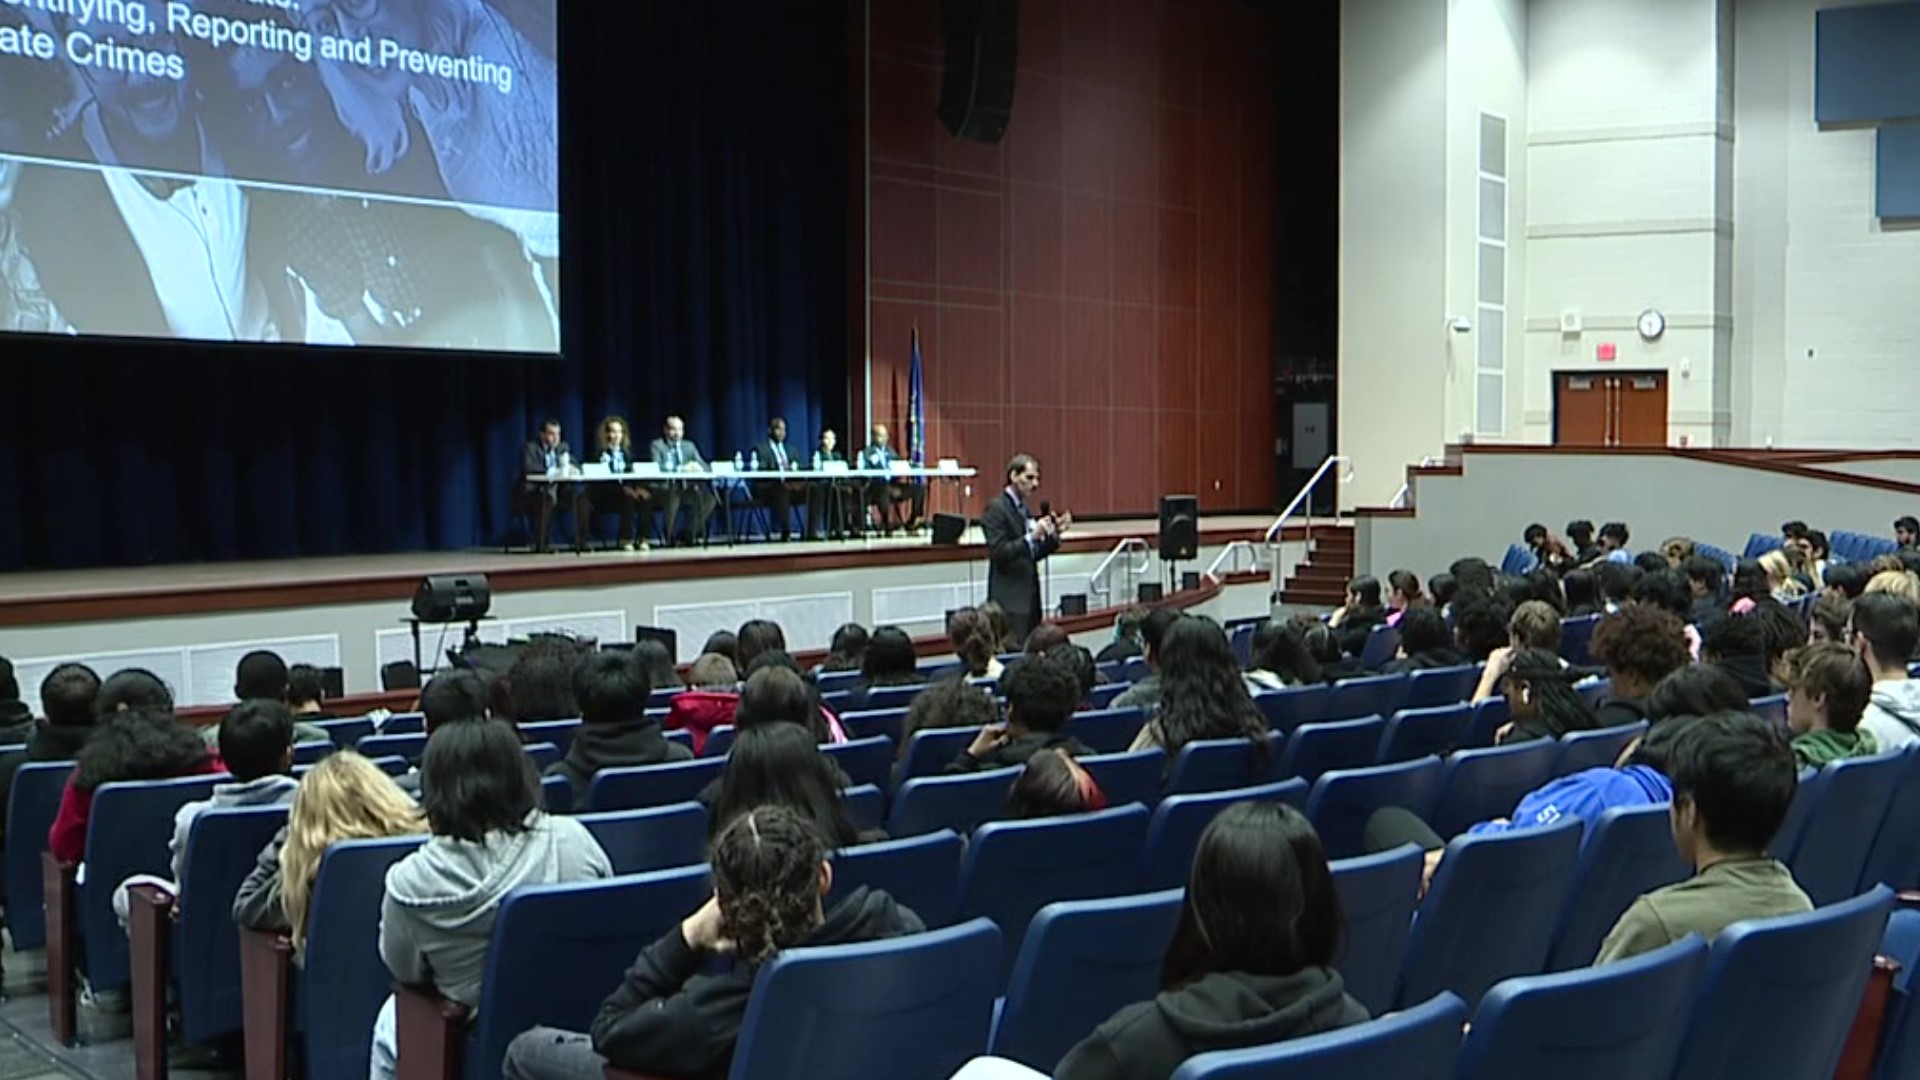 Wilkes-Barre Area students took part in an eye-opening presentation from authorities on the nature of hate crimes.